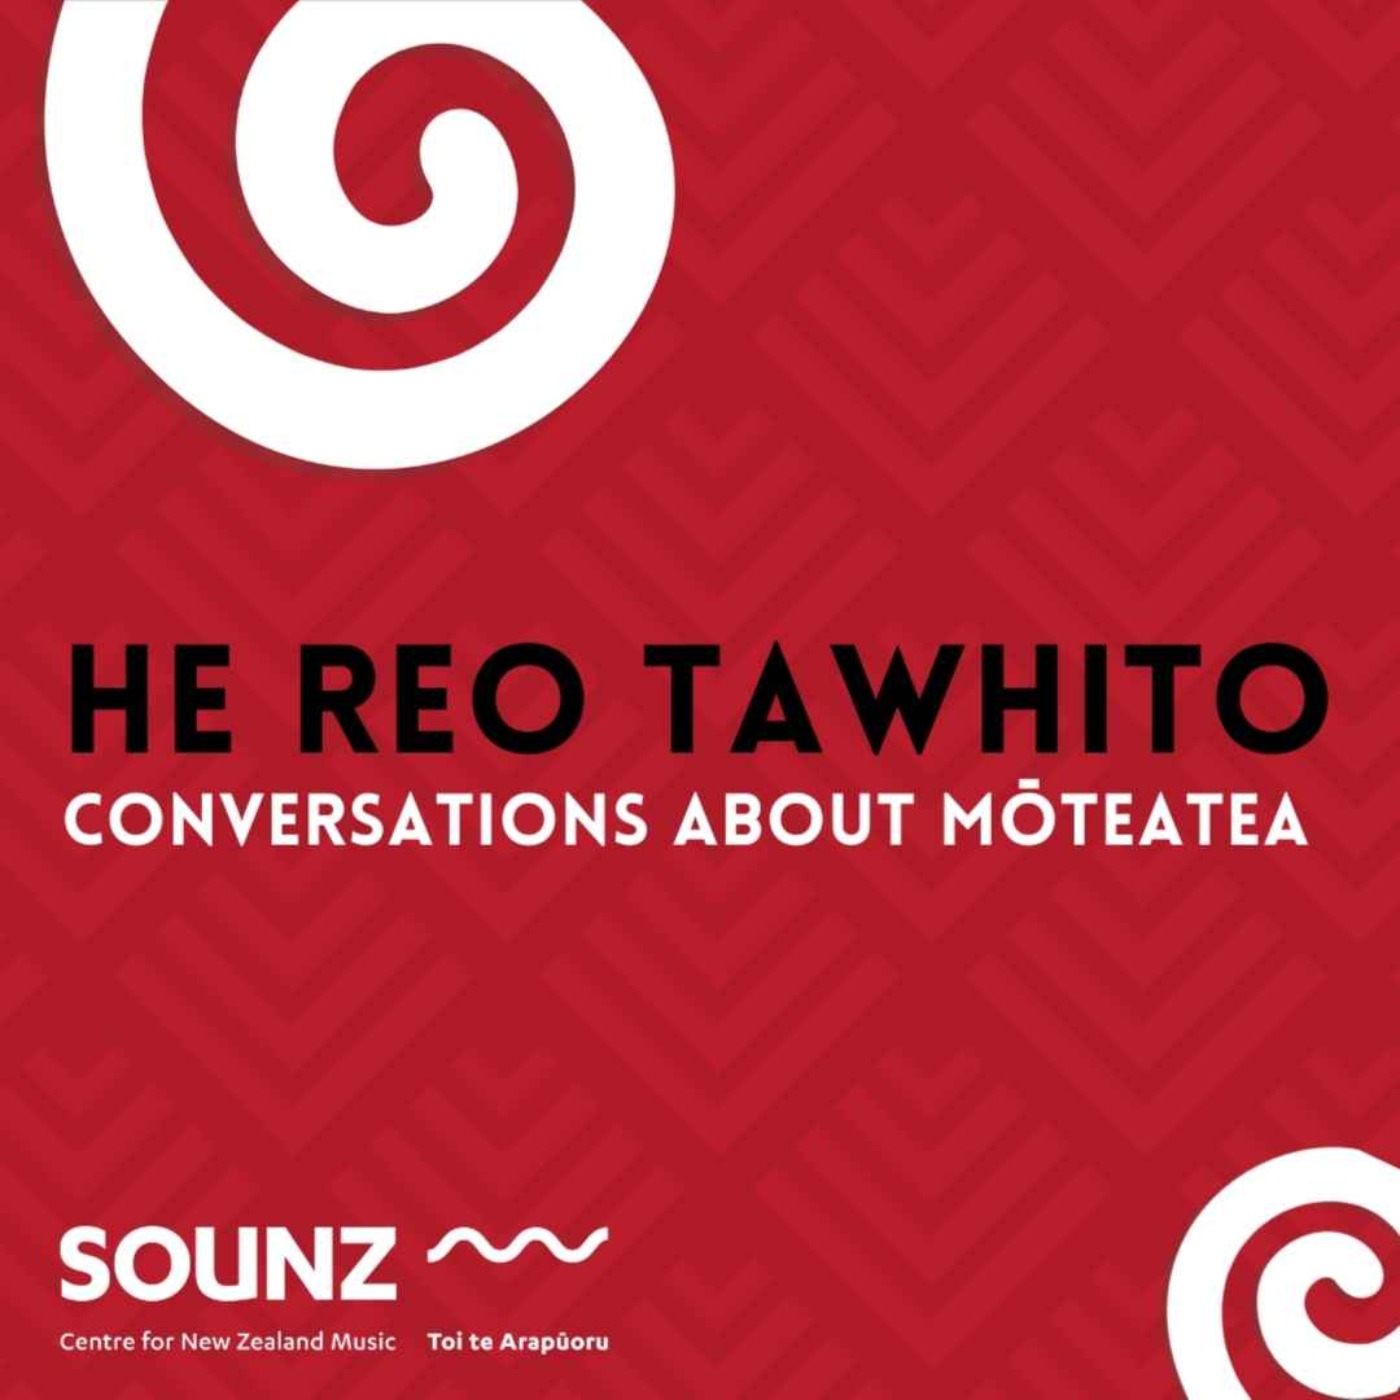 He Reo Tawhito: Conversations about Mteatea